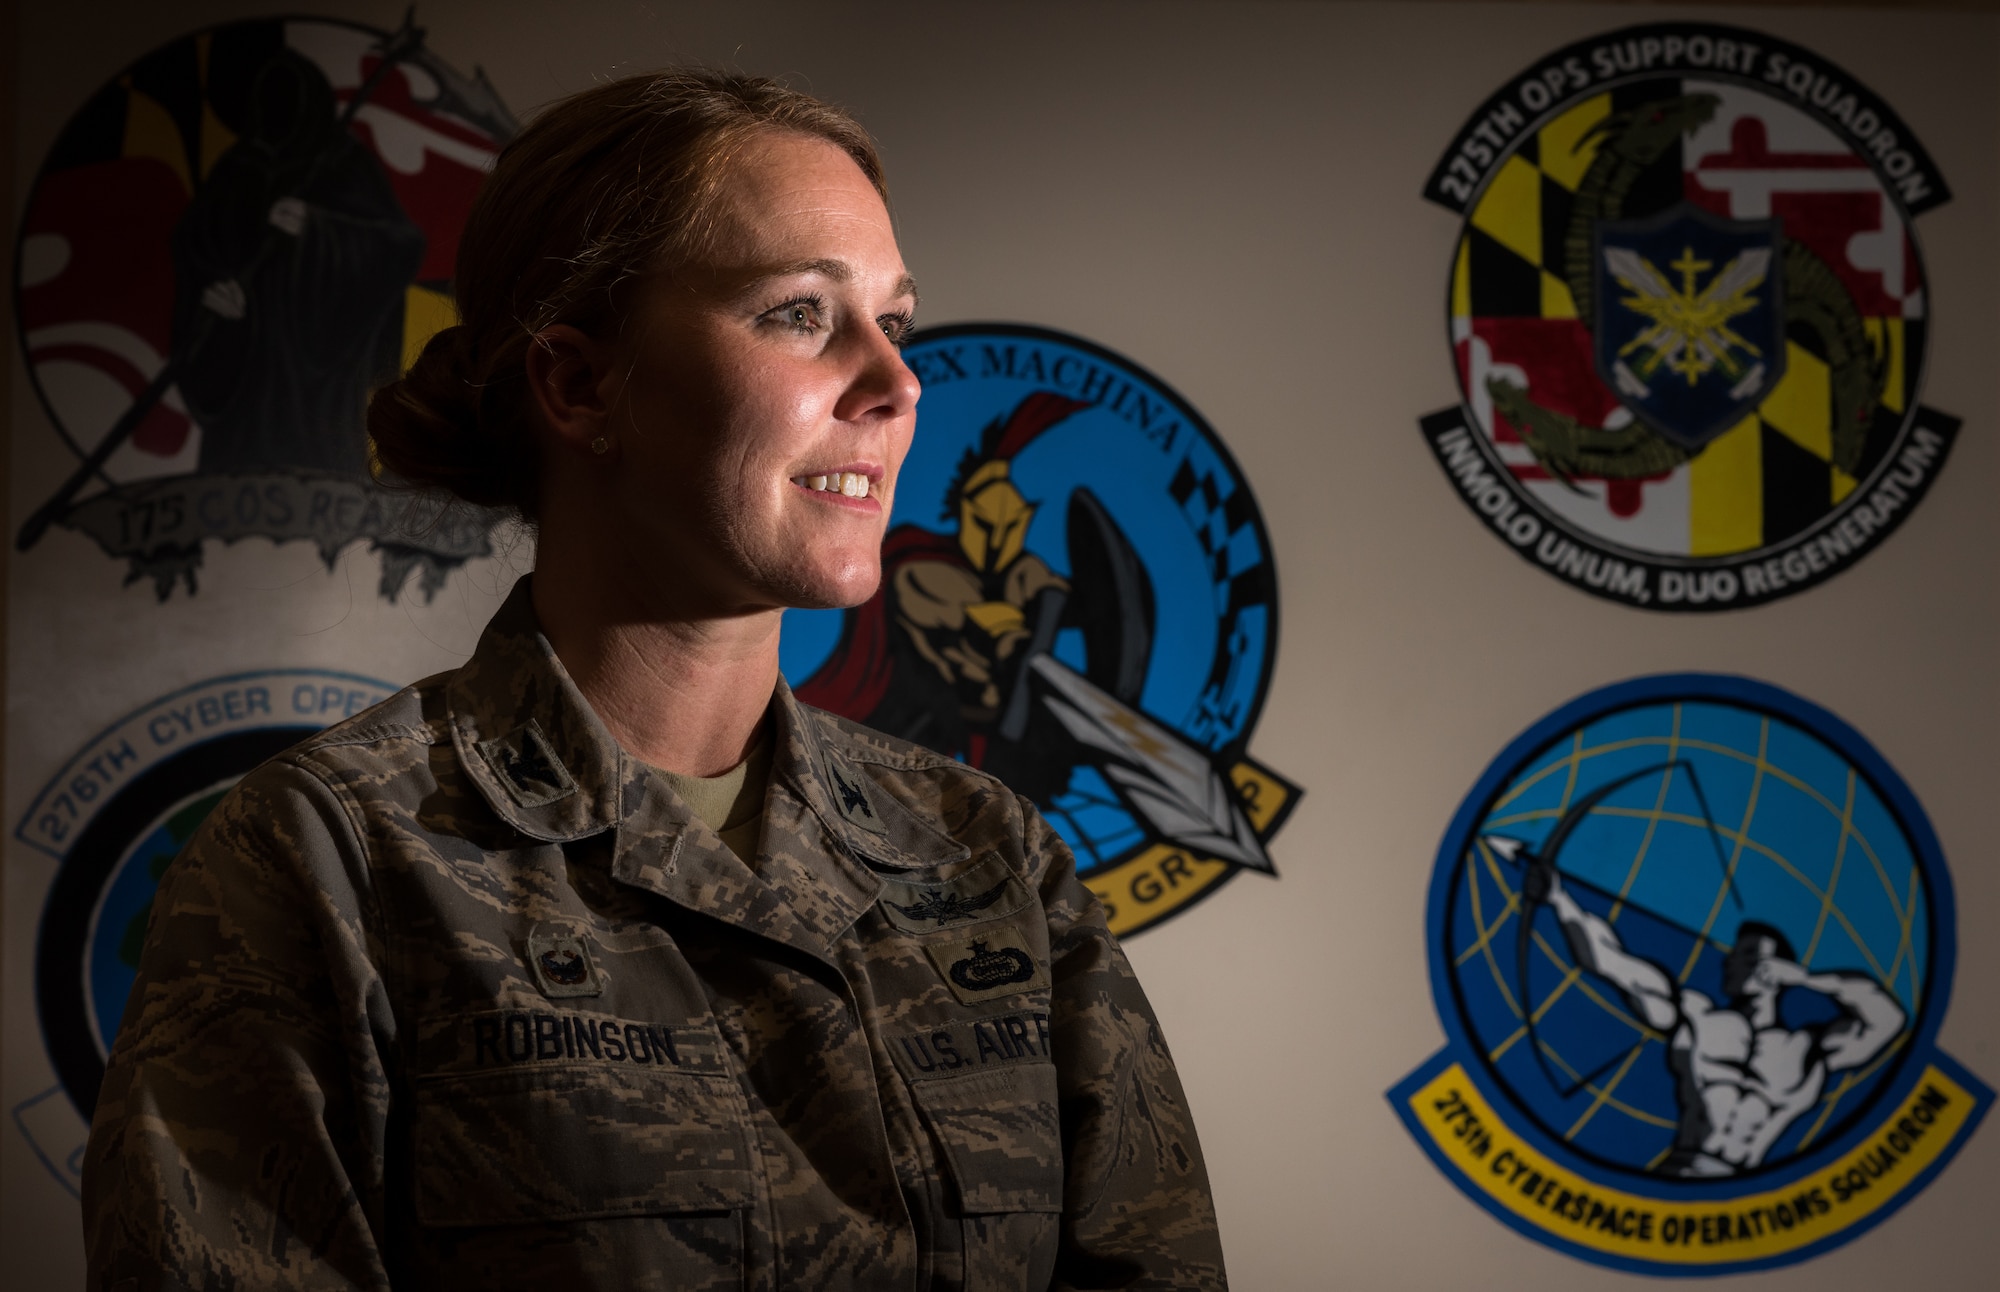 Col. Jori Robinson commands the 175th Cyberspace Operations Group of the Maryland Air National Guard, at Warfield Air National Guard Base, Middle River, Md., Dec. 2, 2017. Robinson believes the experience her Airmen gain from defensive cyber-security efforts in the civilian world greatly benefit, both defensive and offensive, Air Force cyber missions. (U.S. Air Force photo by J.M. Eddins Jr.)